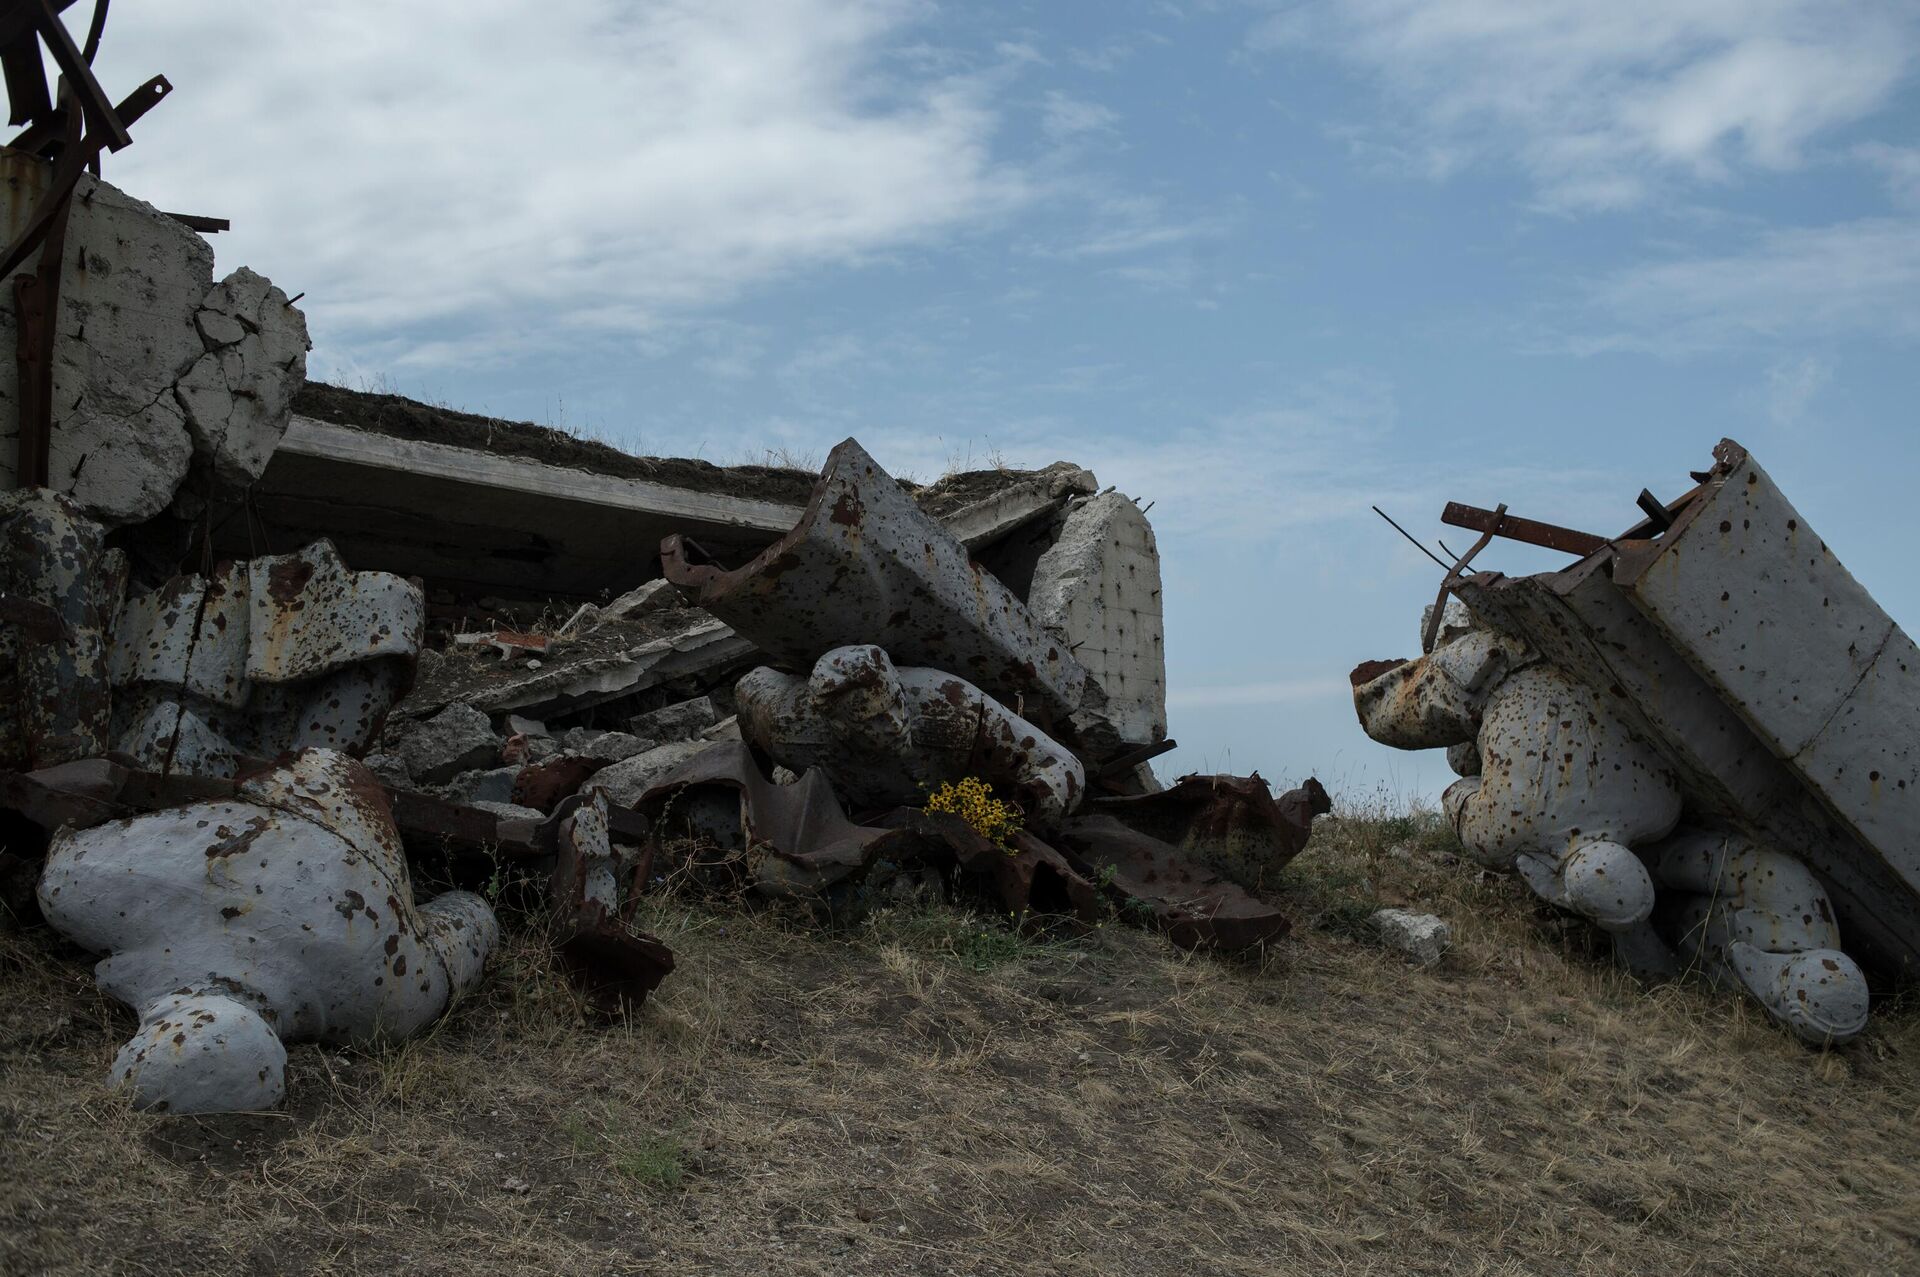 Ruins at the WWII memorial on Saur-Mogila hill in Donetsk. The memorial was destroyed in heavy fighting between Donbass militias and Ukrainian forces in 2014. - Sputnik International, 1920, 16.04.2022